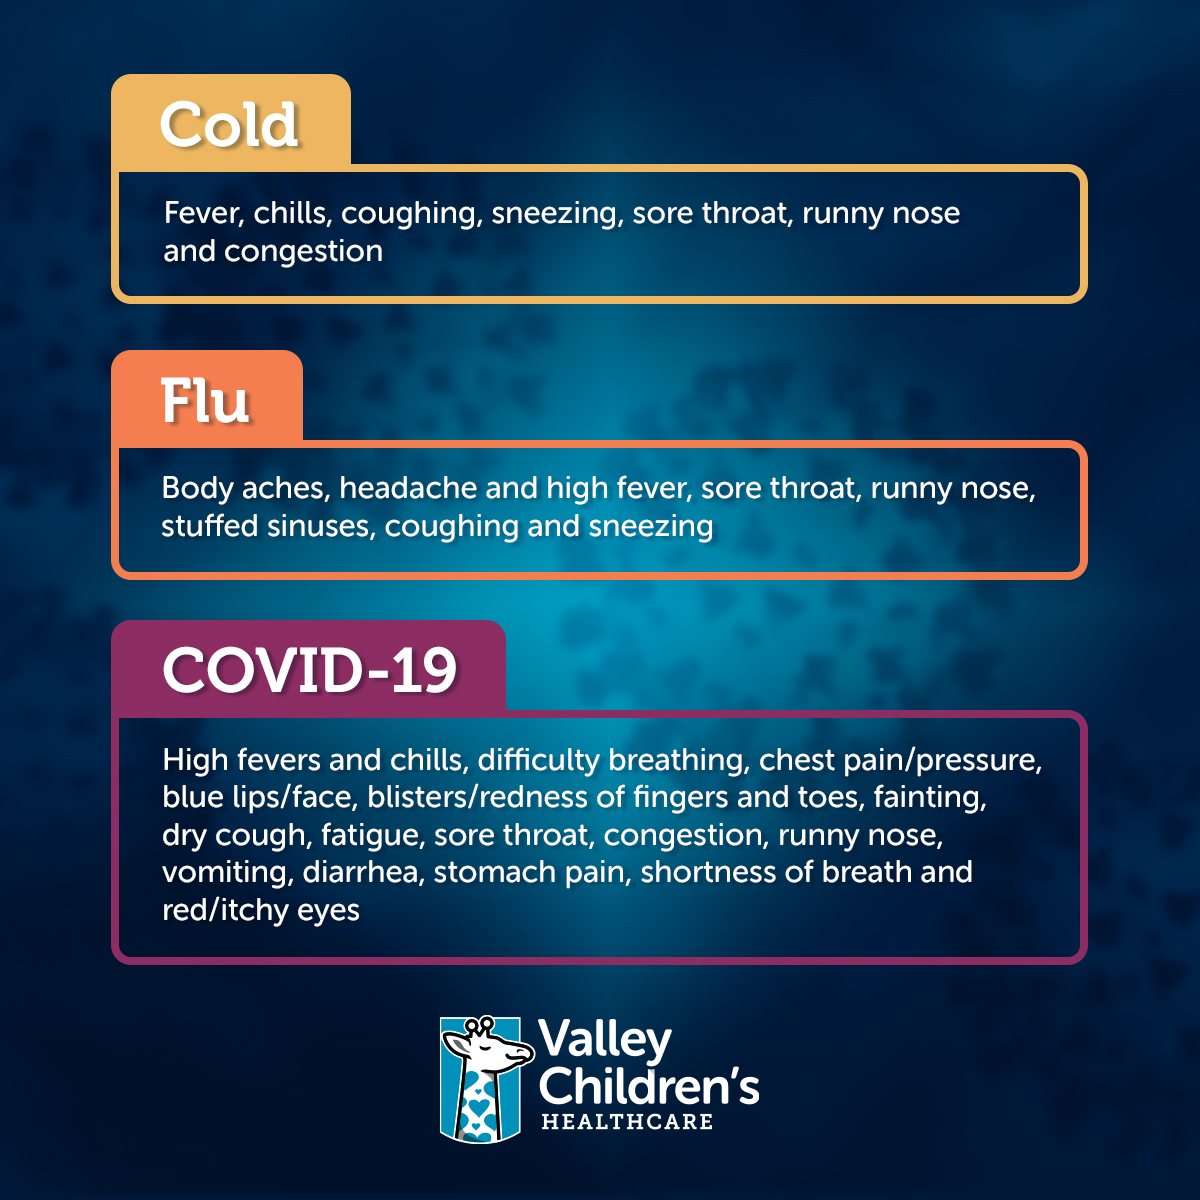 Graphic showing the differences in symptoms between cold, flu, and COVID-19